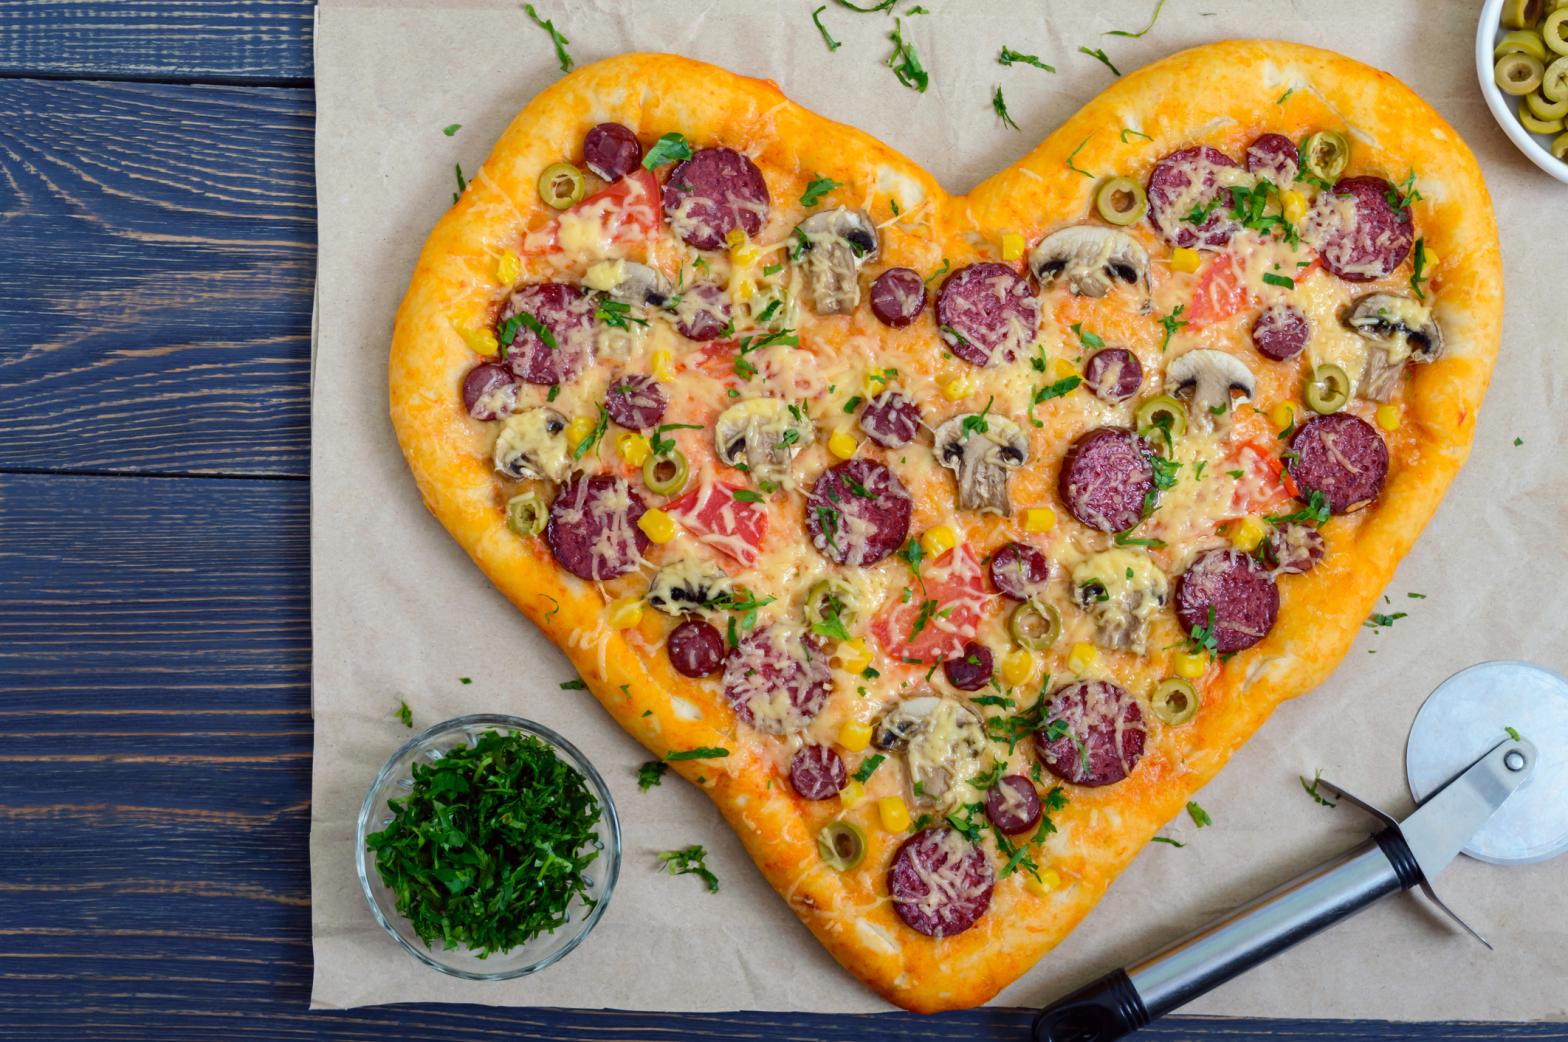 Tasty pizza in a heart shape with mushrooms, salami, pepperoni, olives, corn . The top view